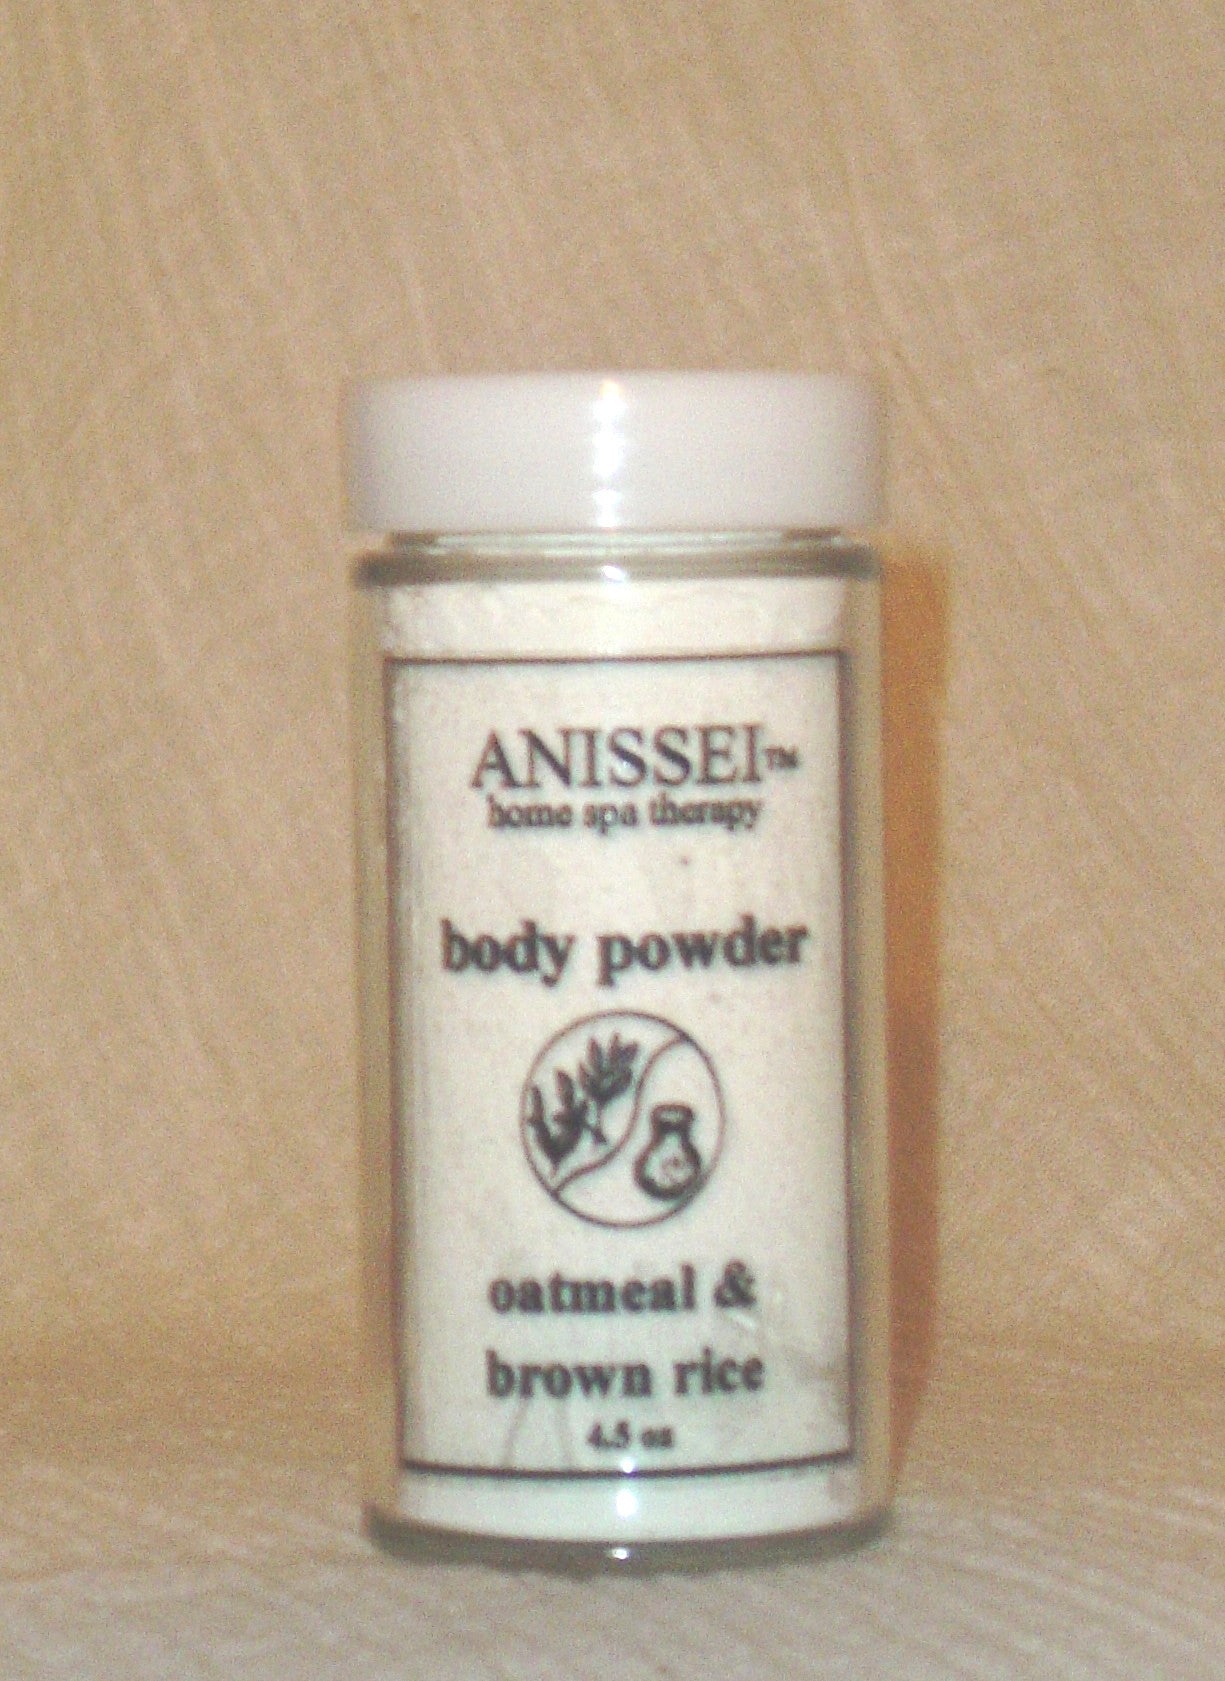 ANISSEI NATURALS HOME SPA THERAPY OATMEAL & BROWN RICE POWDER 4.5oz Abby Essie